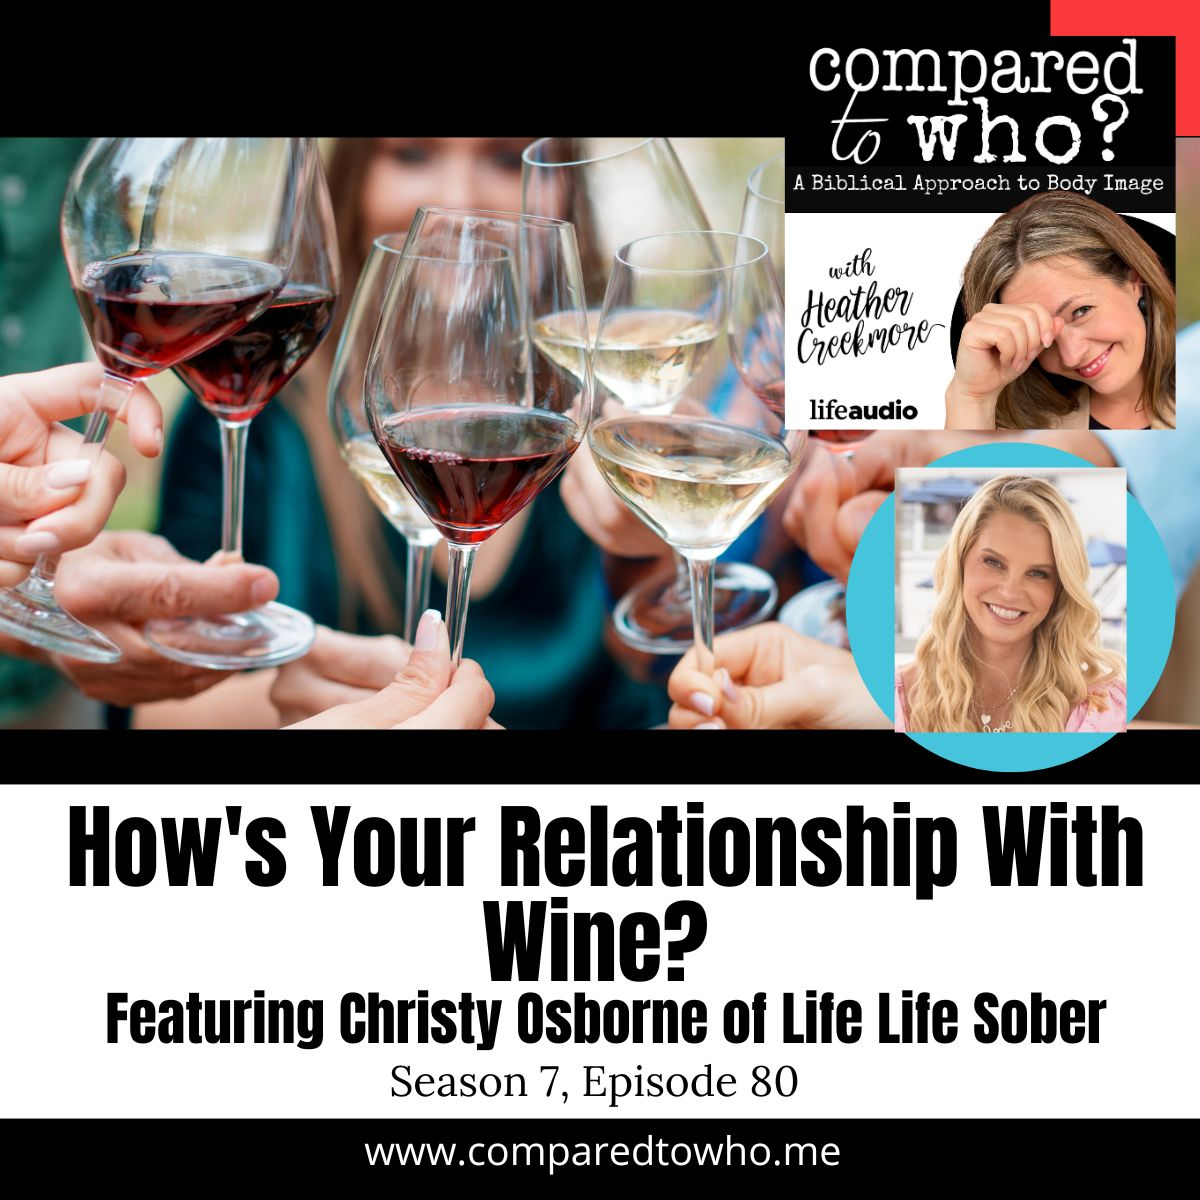 How's Your Relationship With Wine? Featuring Christy Osborne